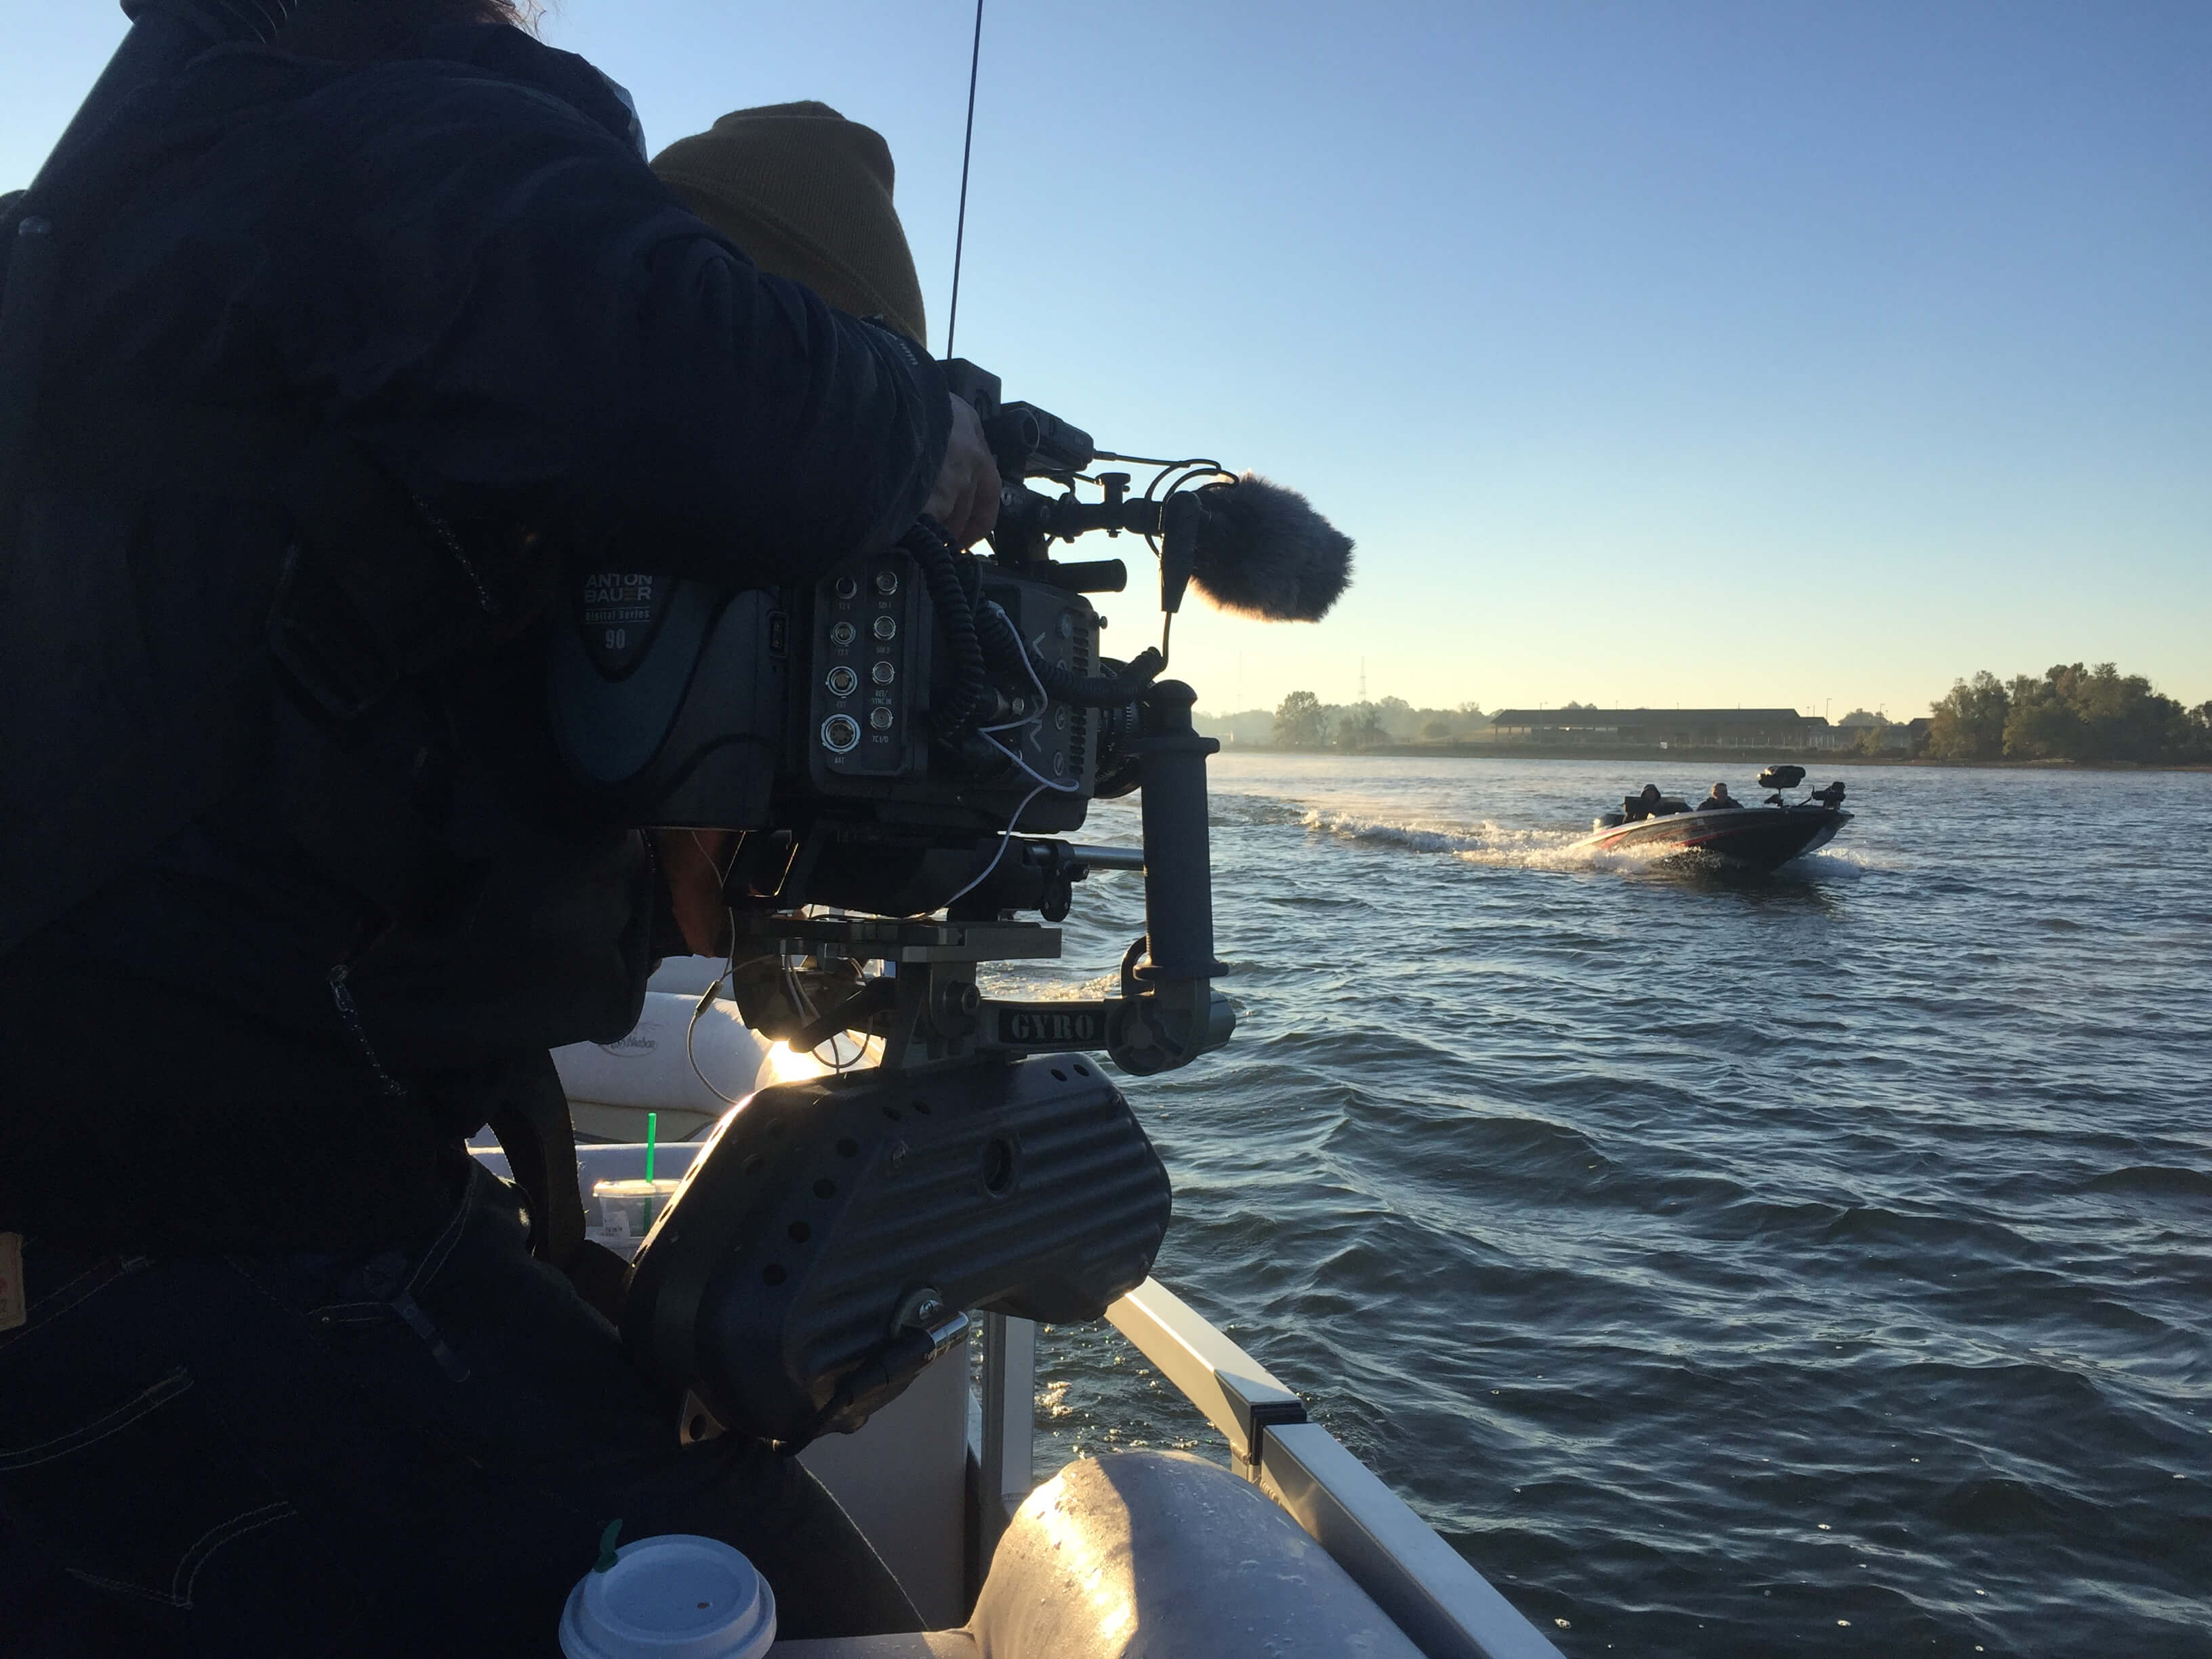 A production still from The Devil We Know. A person operating a large camera mounted to the side of a boat. They are pointing the camera at another boat passing by on the water, headed in the opposite direction. It is daytime.